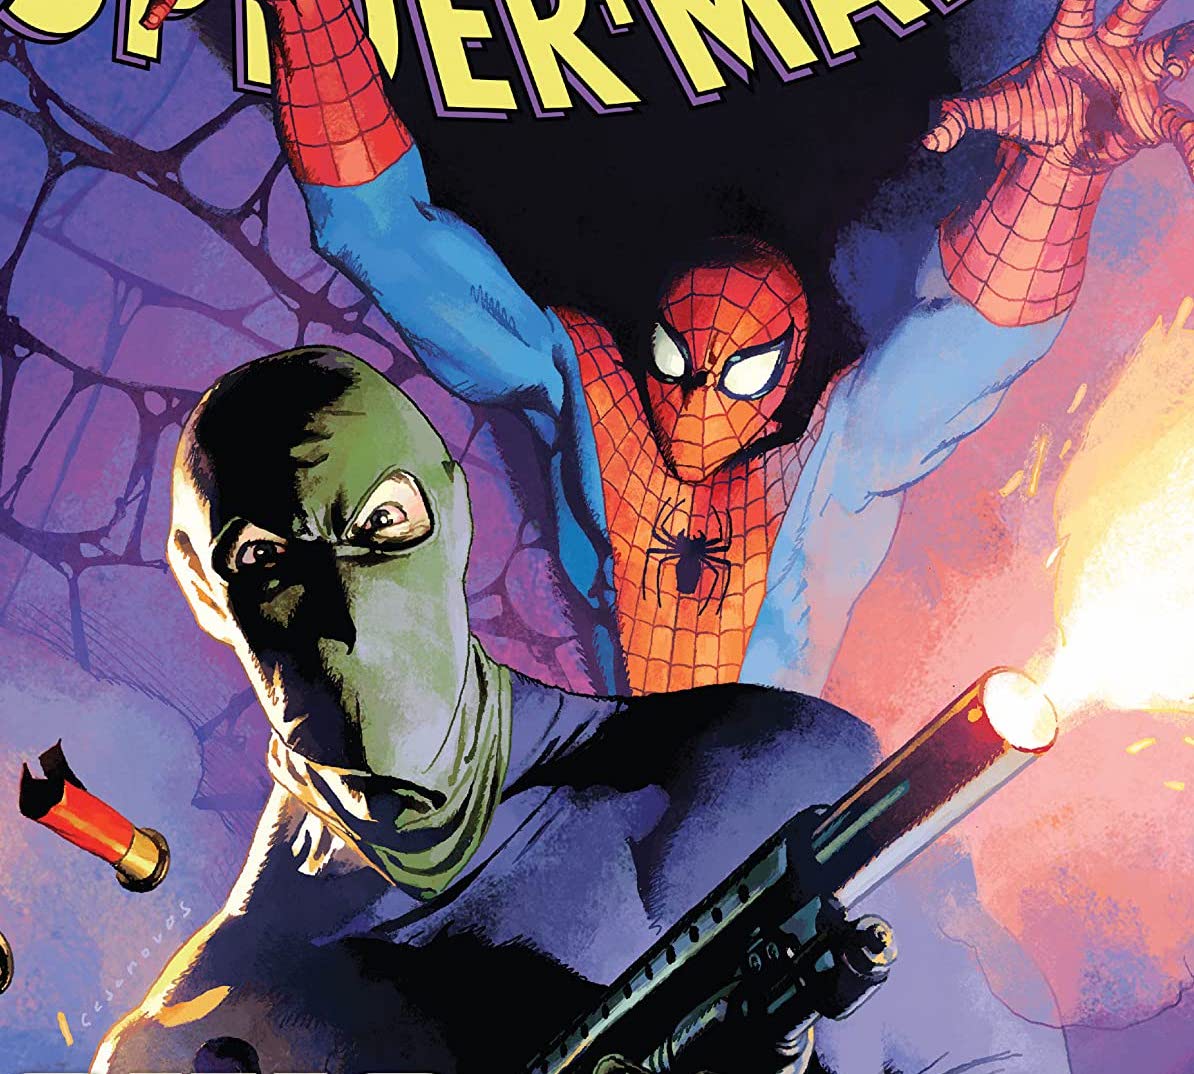 'Amazing Spider-Man' #45 review: Sets up a strong story arc